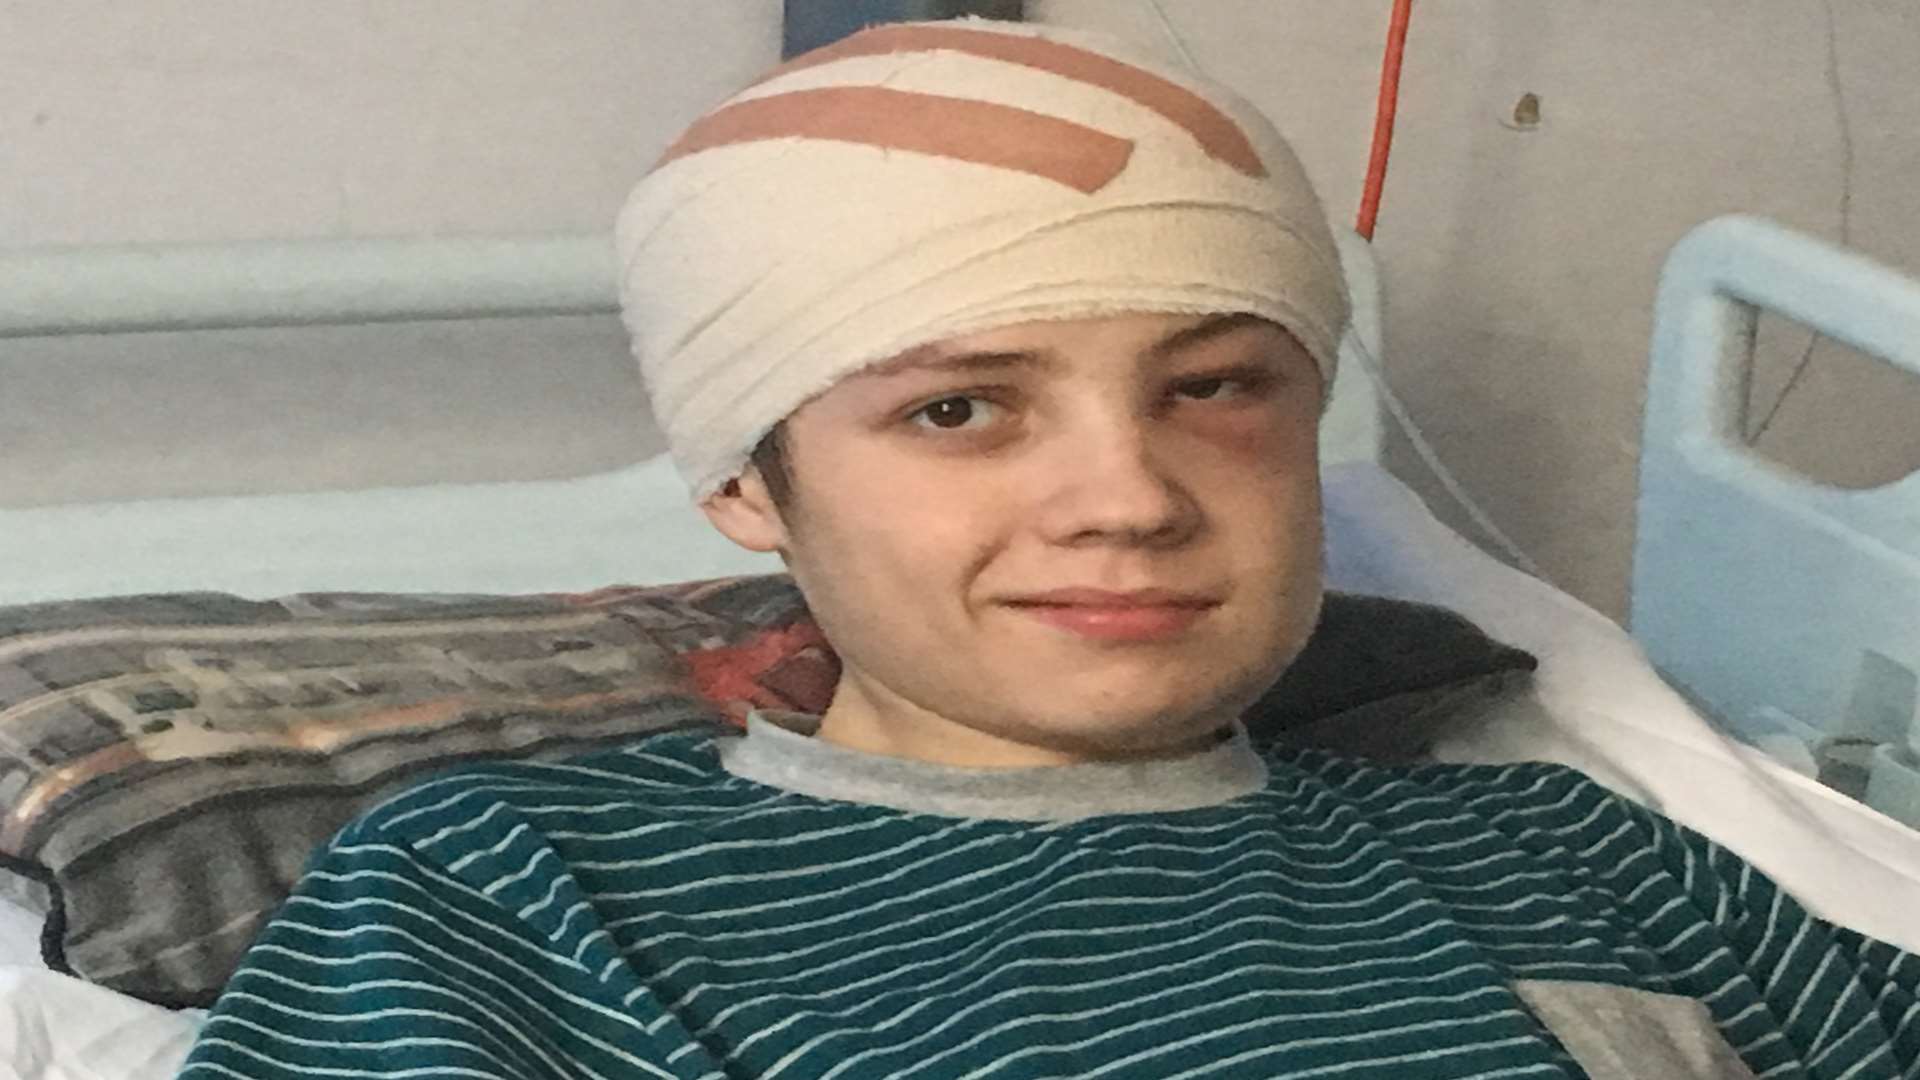 Jayden Powell, pictured recovering from surgery in January